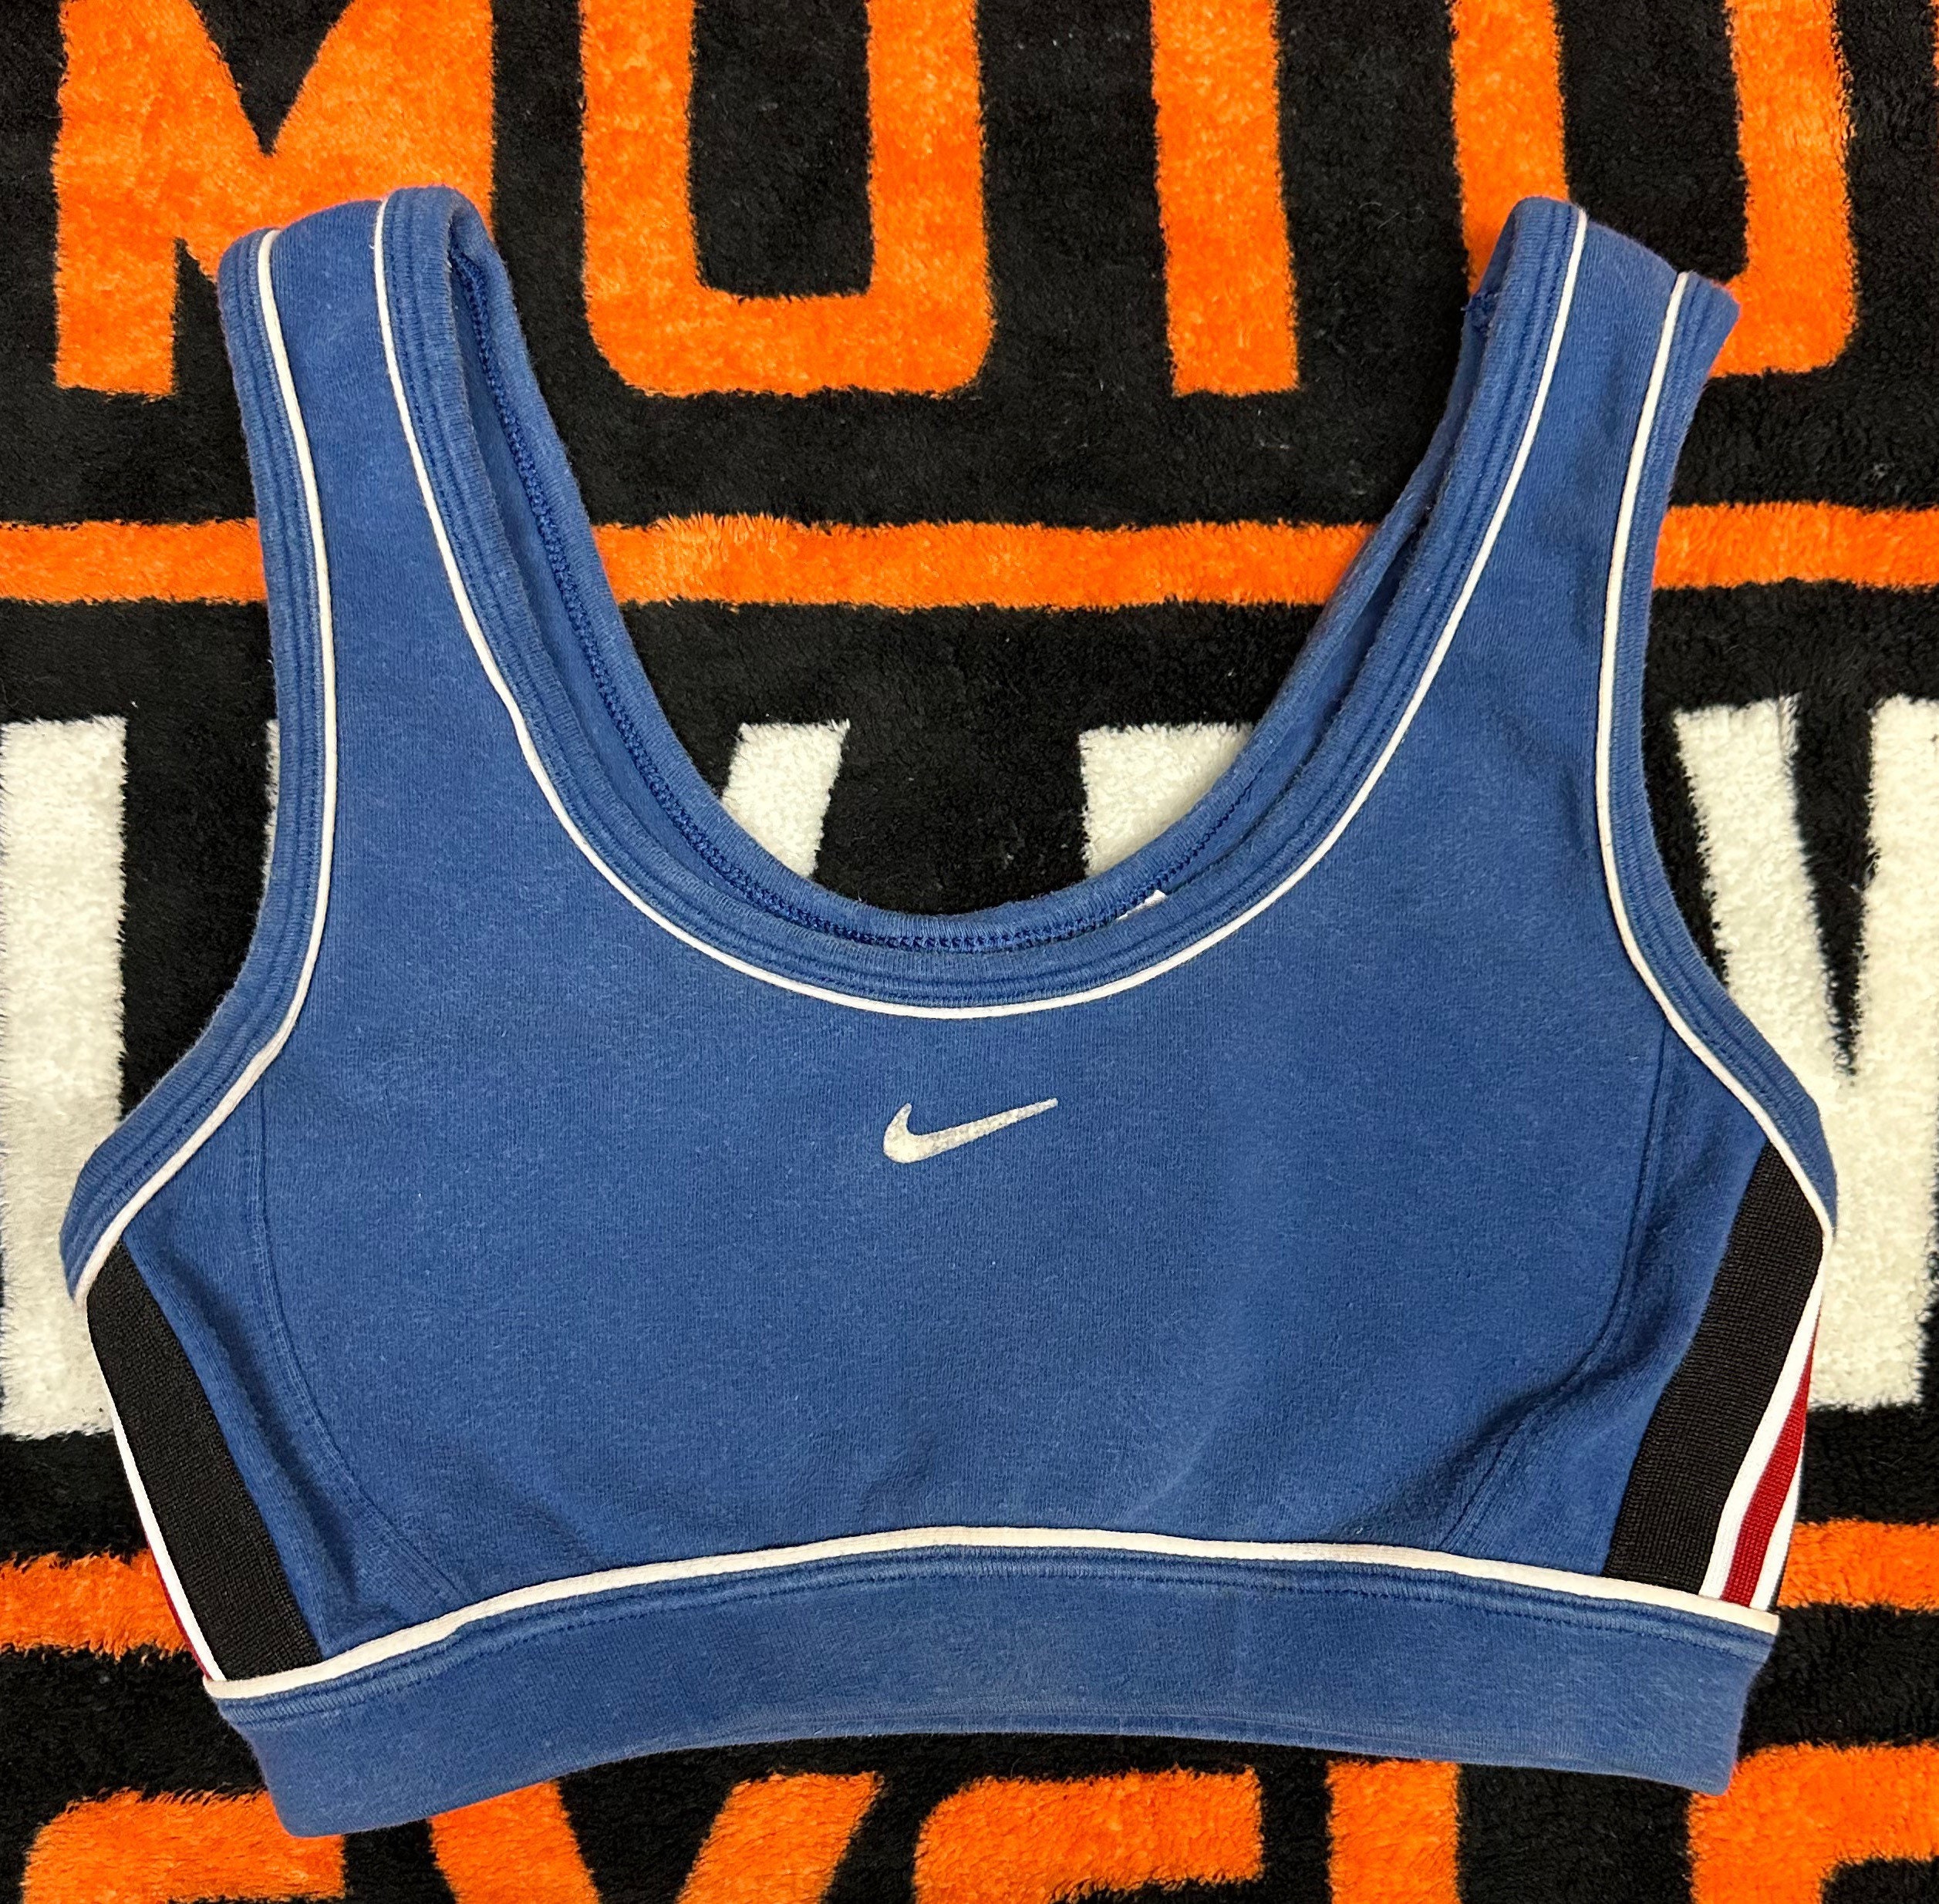 Vintage 90s Nike Sports Bra Top Middle Center Swoosh Size Womens Small 4-6  Made in USA 